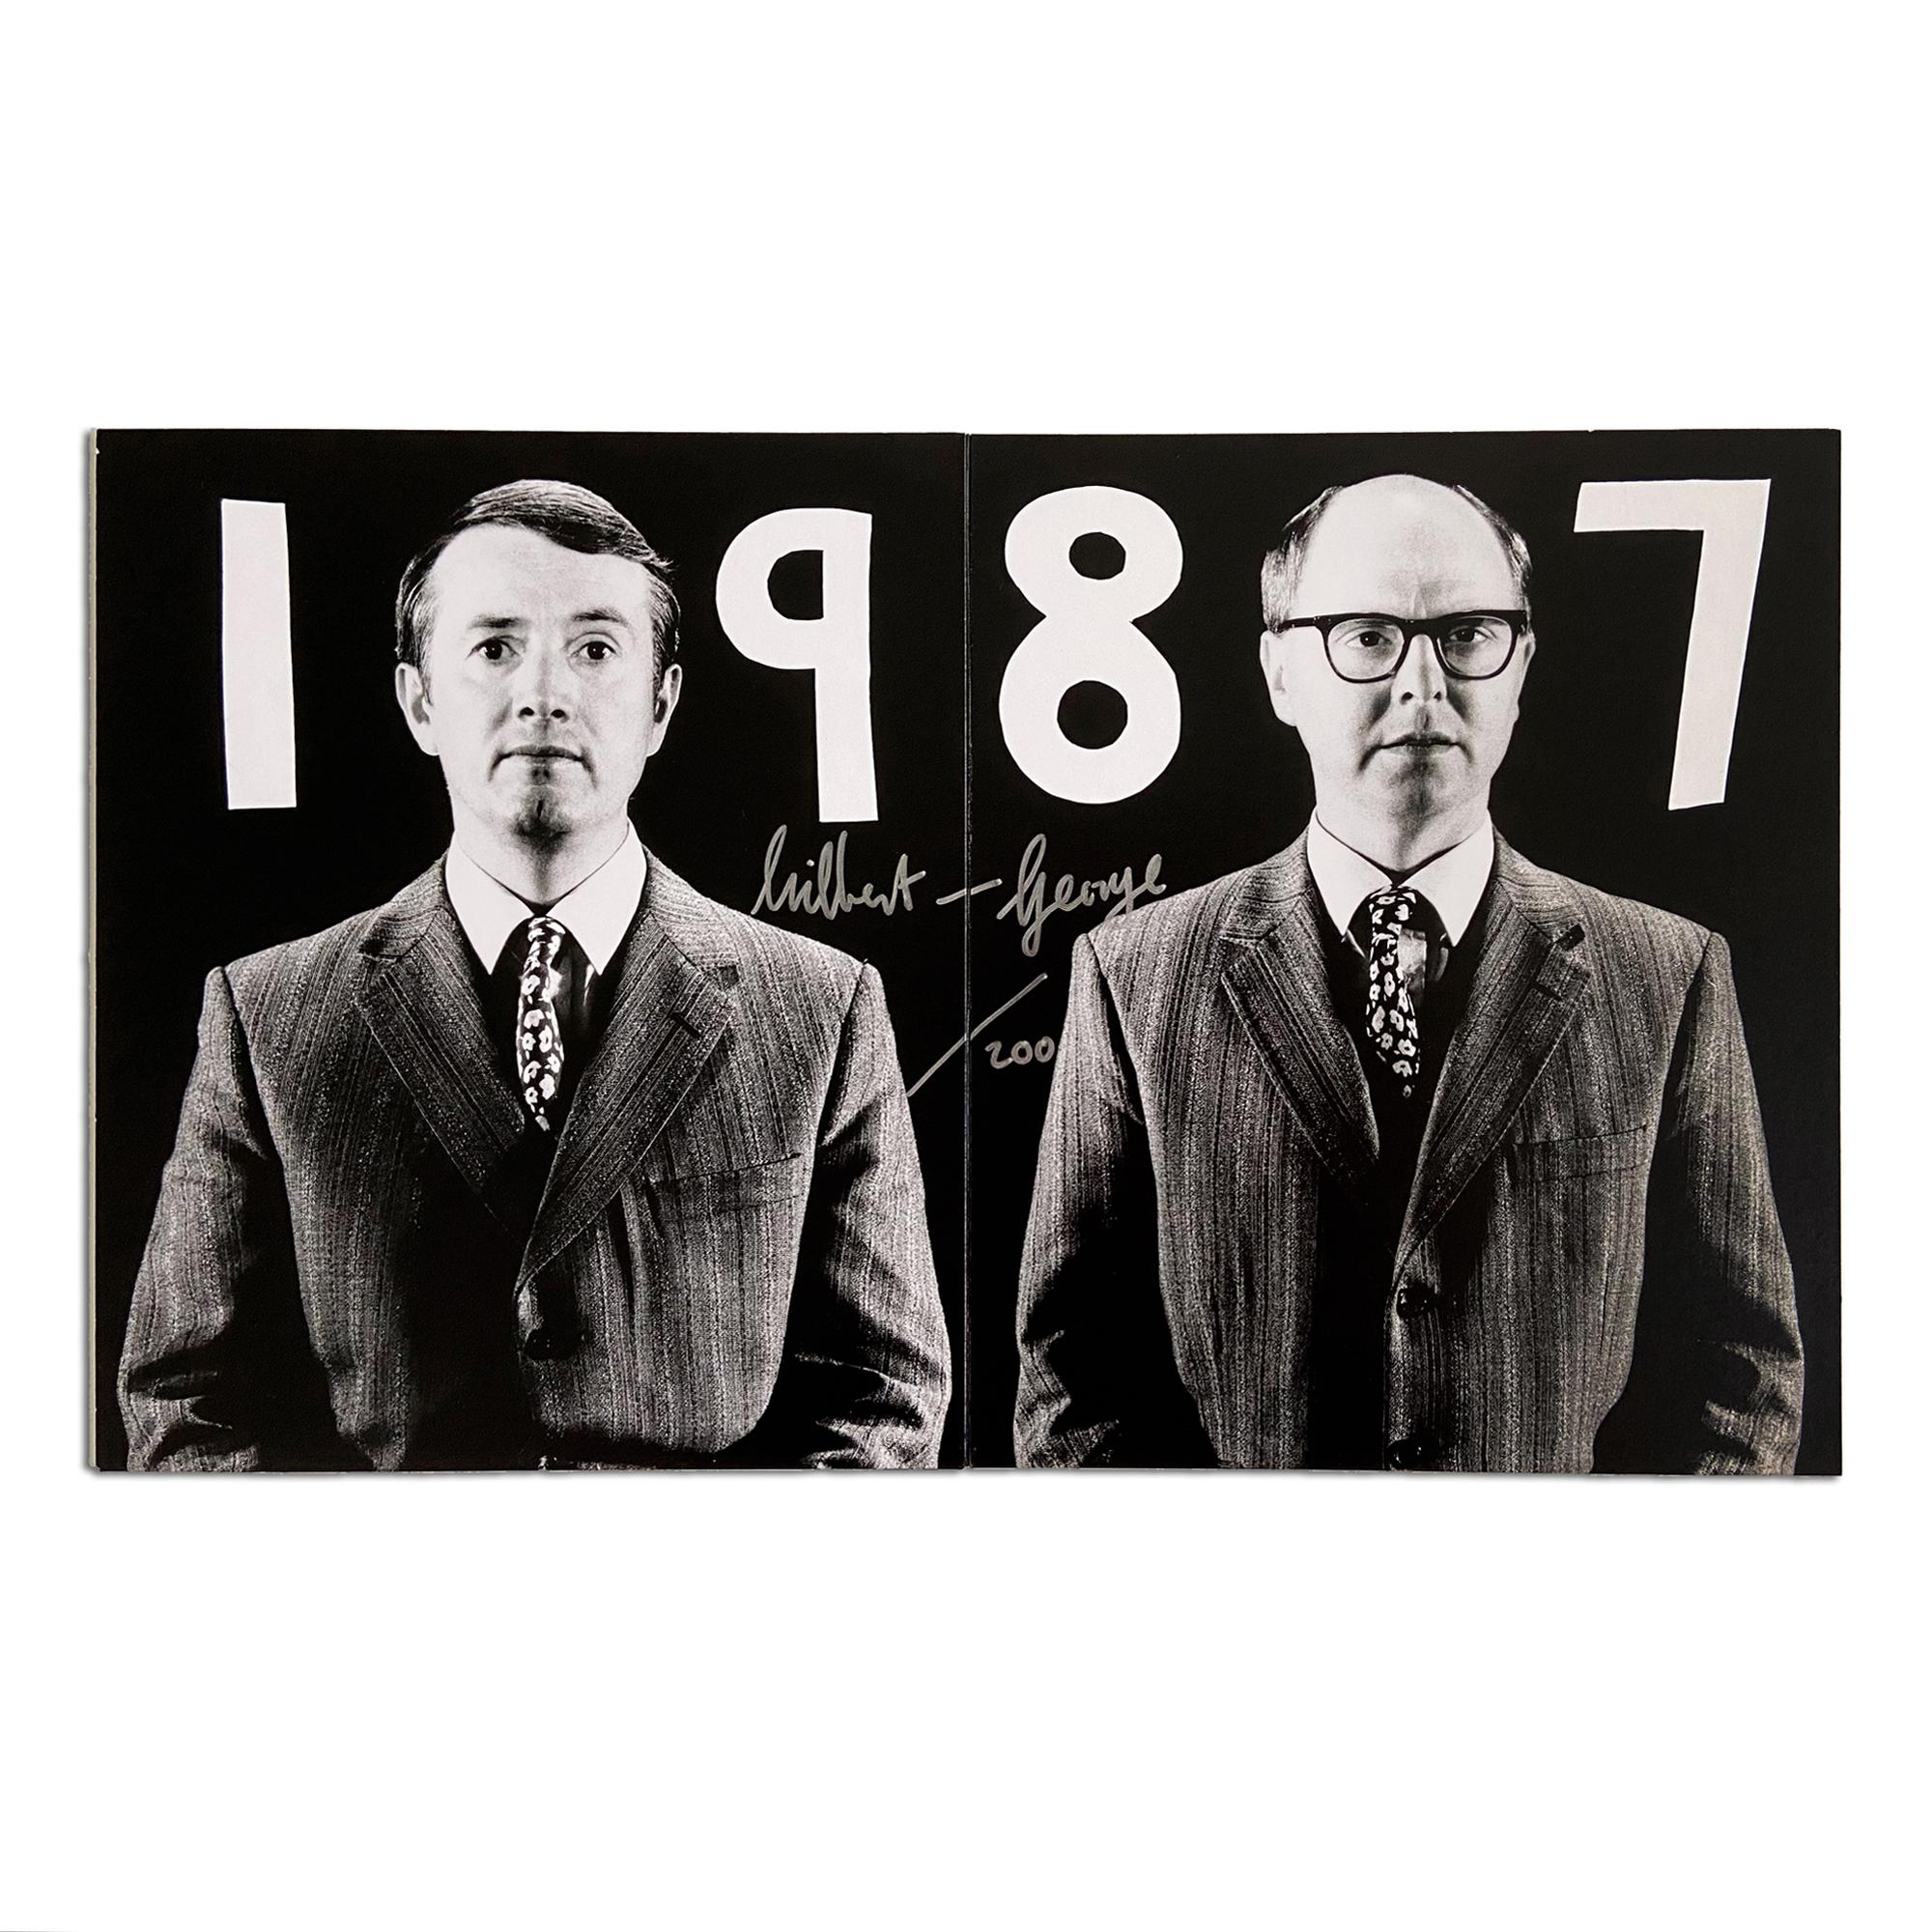 Gilbert & George (British, b. 1942 and 1943)
1987 (Parkett Edition No. 14), 1987
Medium: Photograph, mounted on cardboard, folded in the middle
Dimensions:  25,5 x 42 cm (10 x 16.5 in)
Edition of 200: Hand-signed and numbered in felt-tip